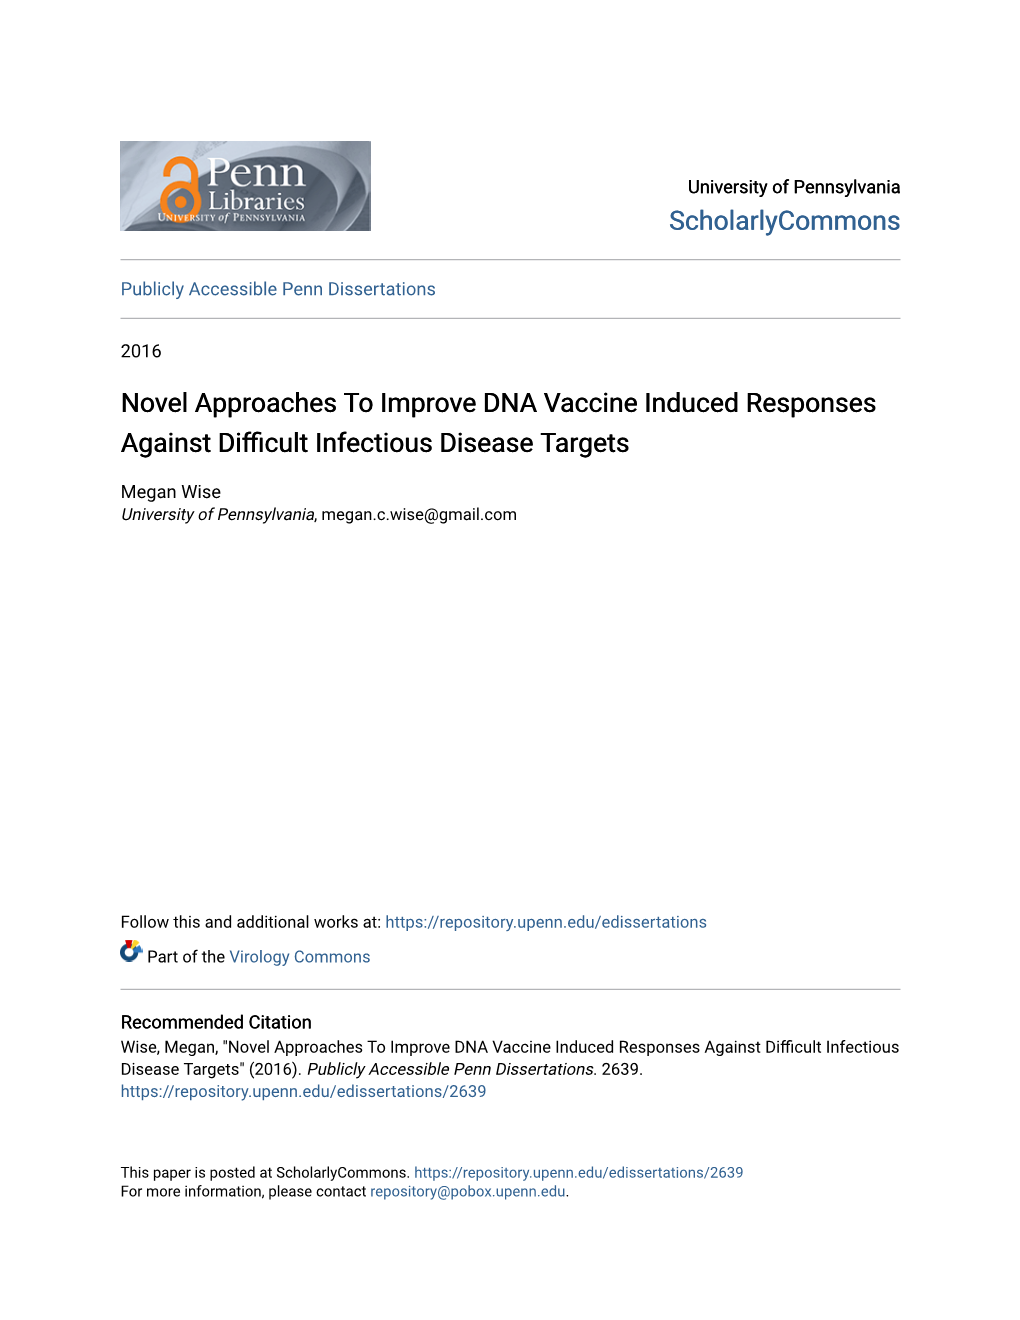 Novel Approaches to Improve DNA Vaccine Induced Responses Against Difficult Infectious Disease Targets